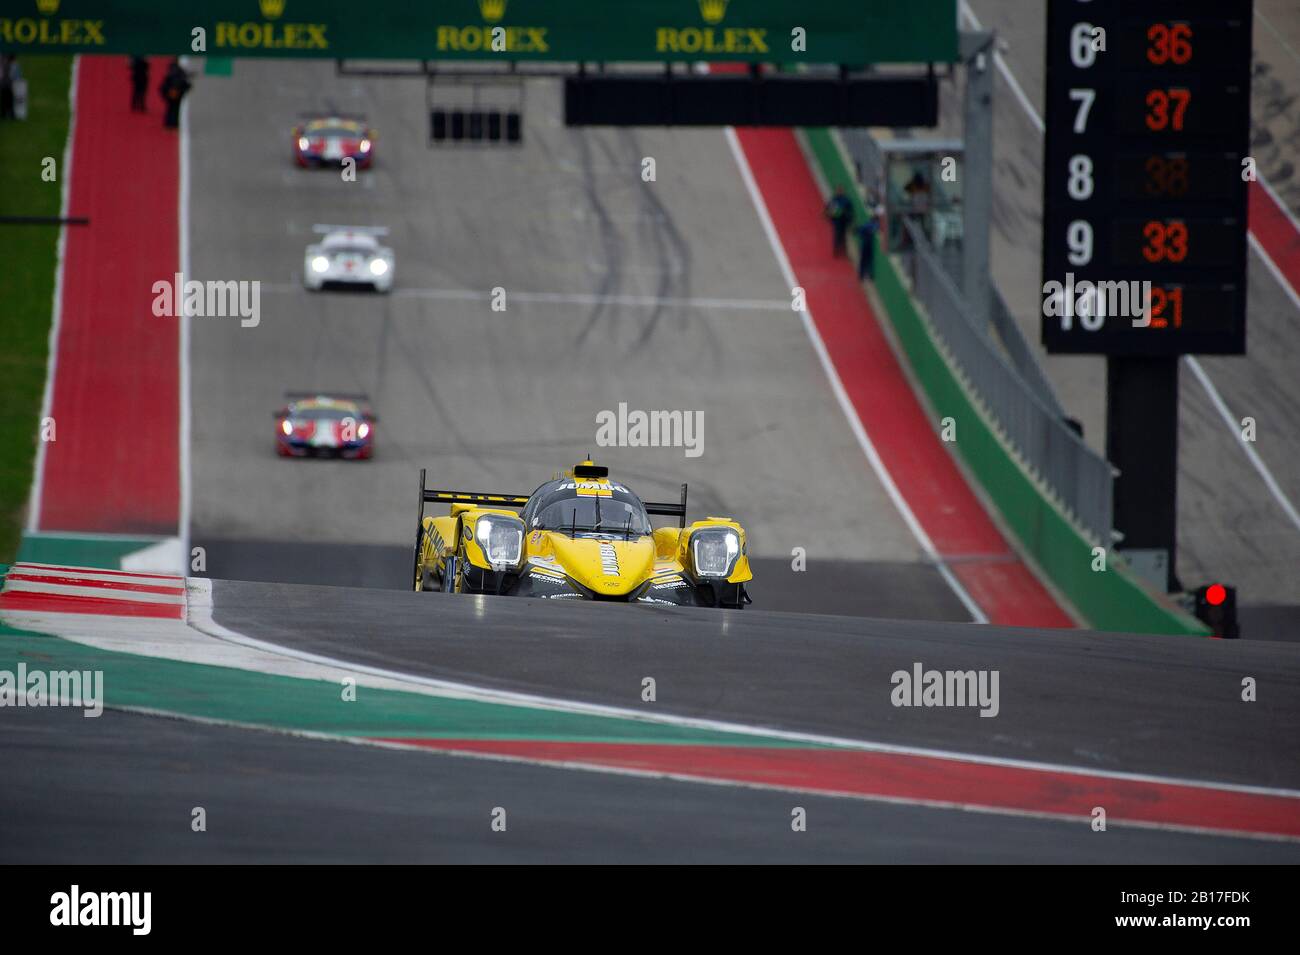 Austin, Texas, USA. 23rd Feb, 2020. Racing Team Nederland Frits Van Eerd (Driver 1), Giedo Van Der Garde (Driver 2), Nyck de Vries (Driver 3) with LMP2 #29 racing the Oreca 07 Gibson at Lone Star Le Mans - 6 Hours of Circuit of The Americas in Austin, Texas. Mario Cantu/CSM/Alamy Live News Stock Photo